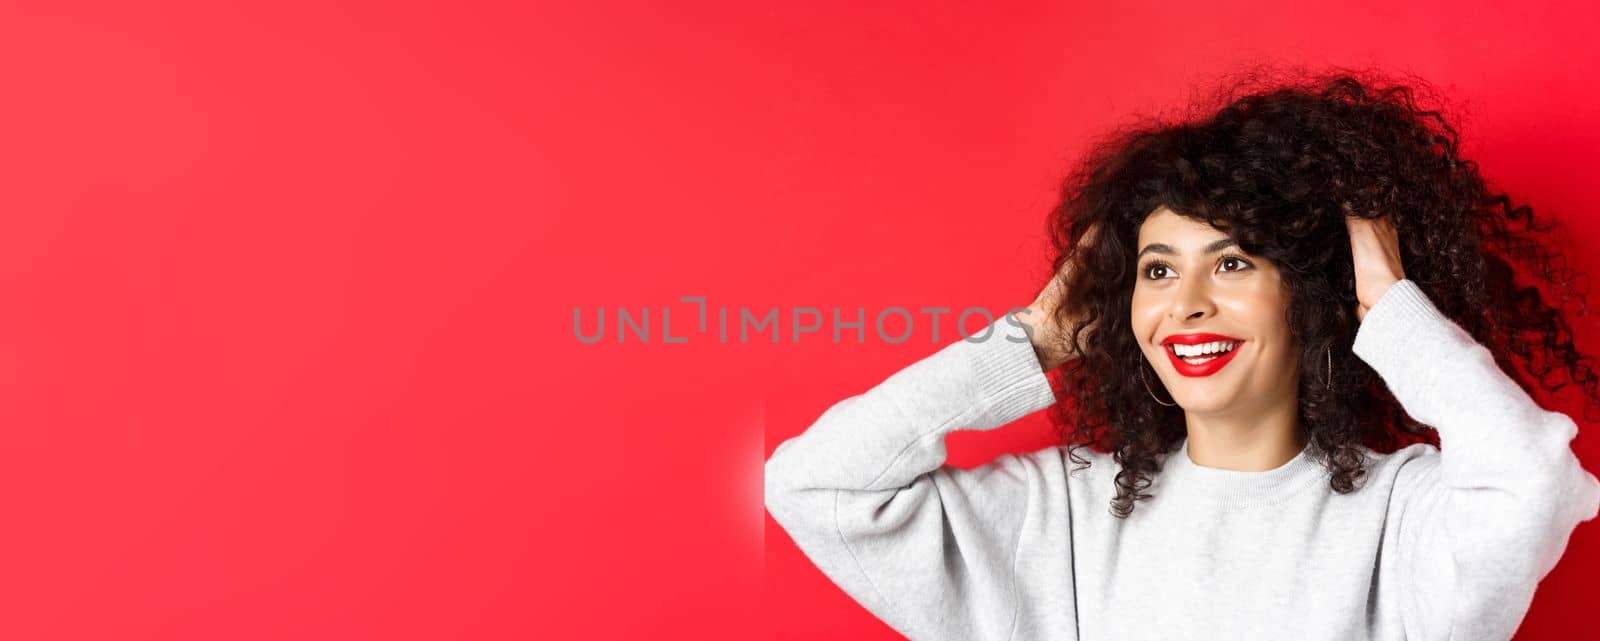 Happy beautiful woman touching natural curly hair and smiling pleased, looking left, like her hairstyle, standing against red background.